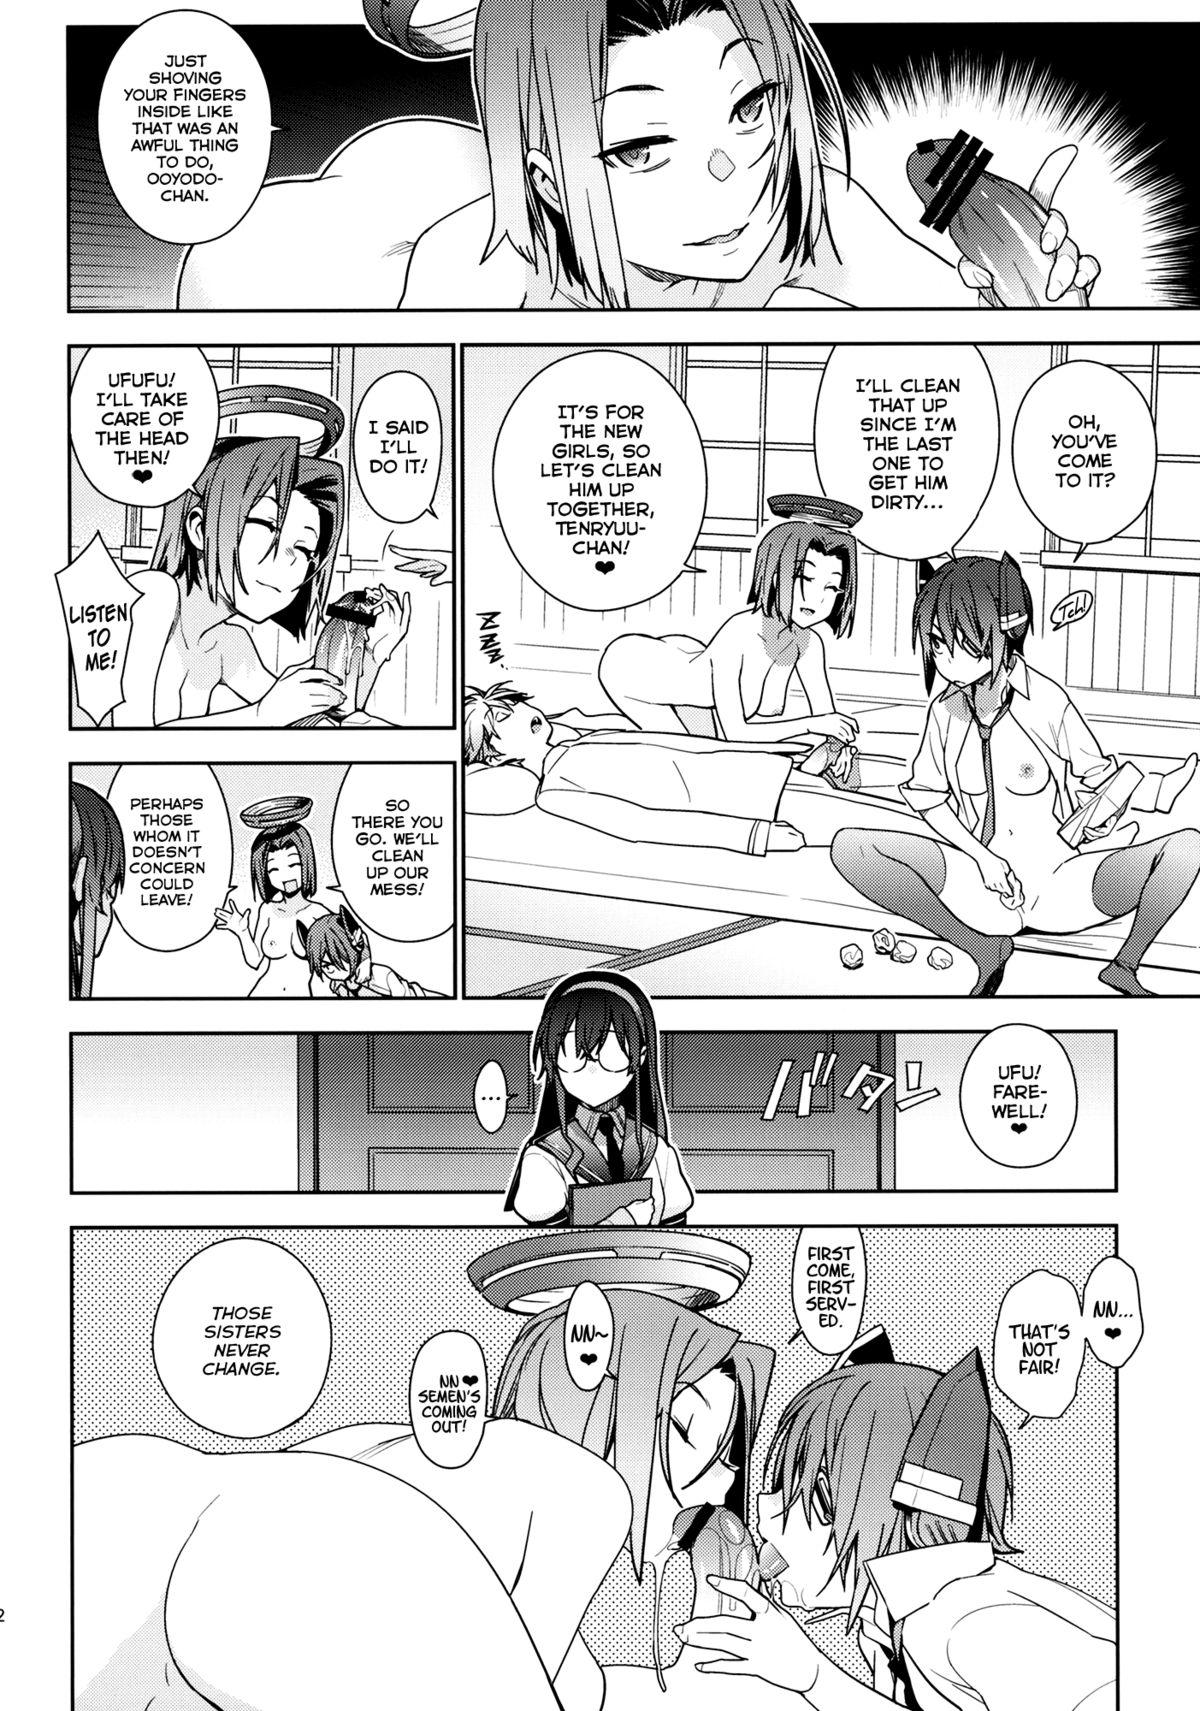 Grande THE LAST ORDER - Kantai collection Teenage Sex - Page 11